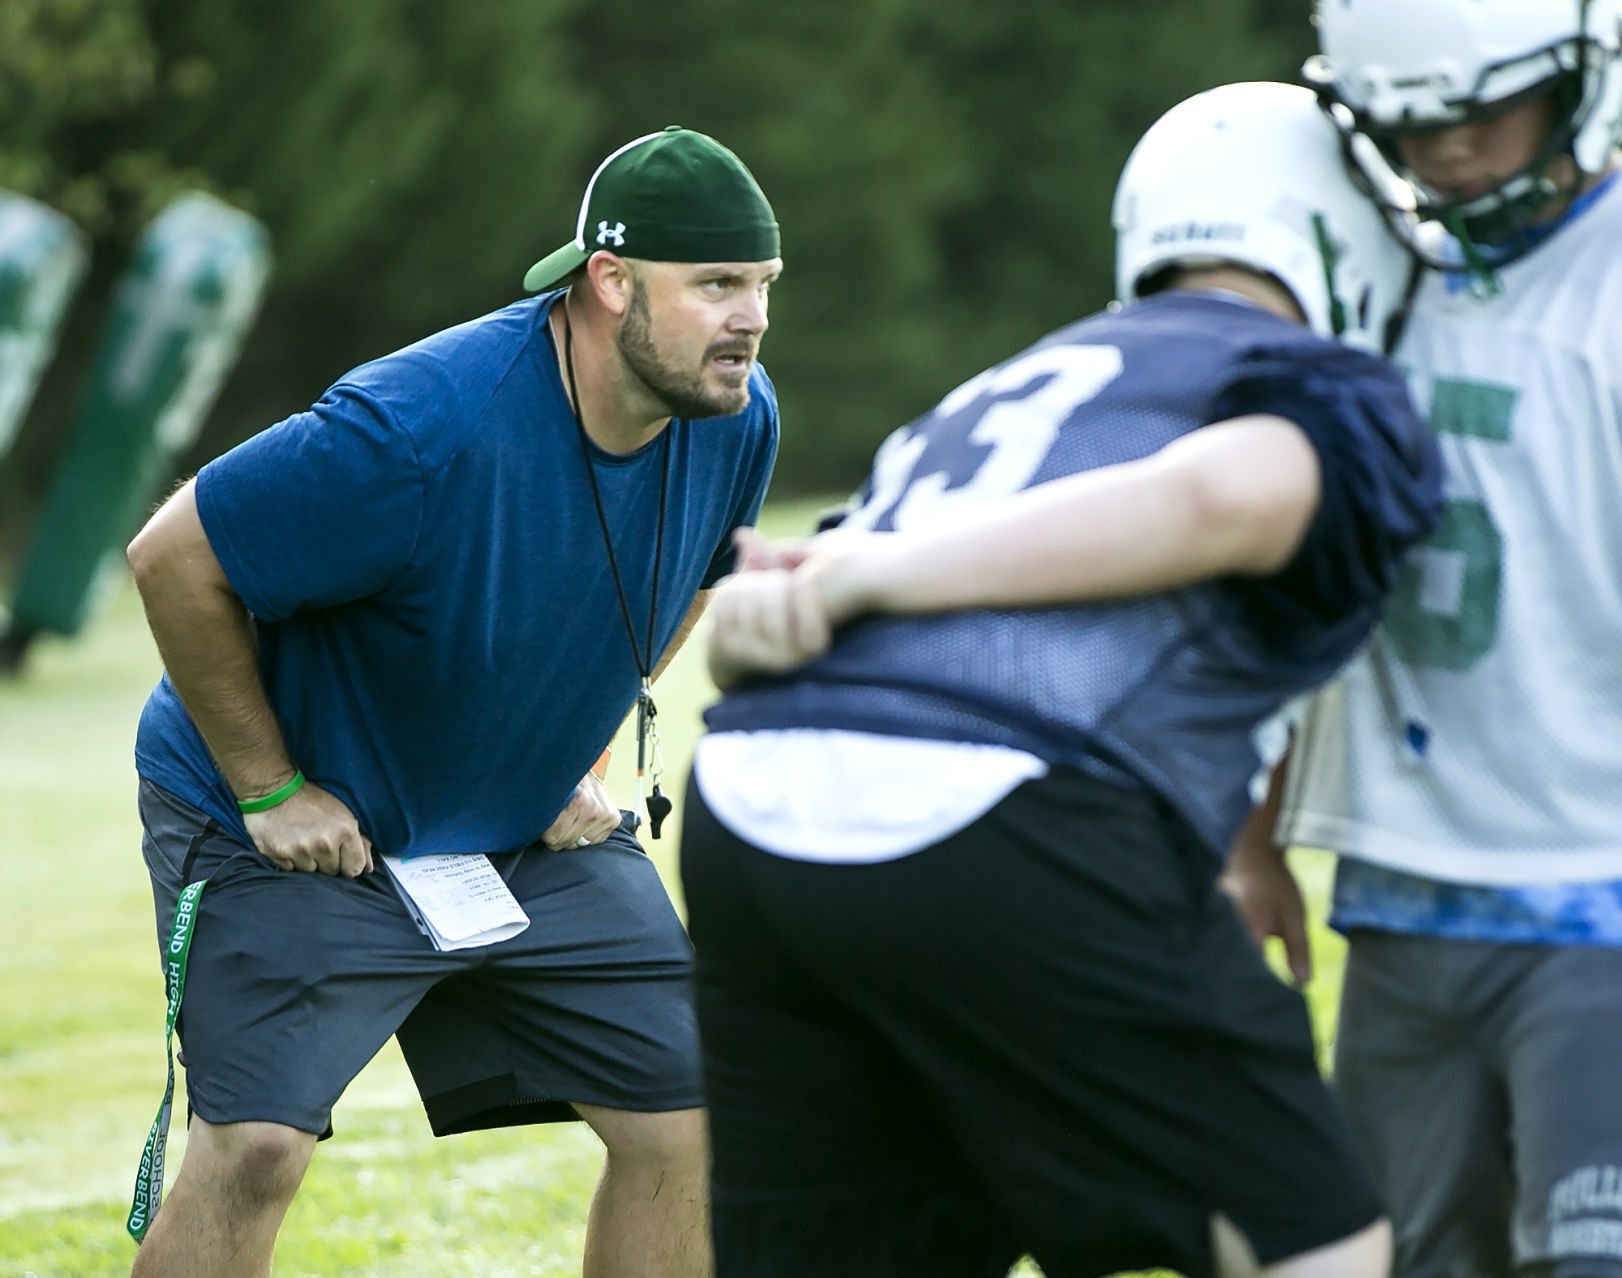 Nathan Yates Steps Down as Riverbend’s Head Football Coach After Five Years